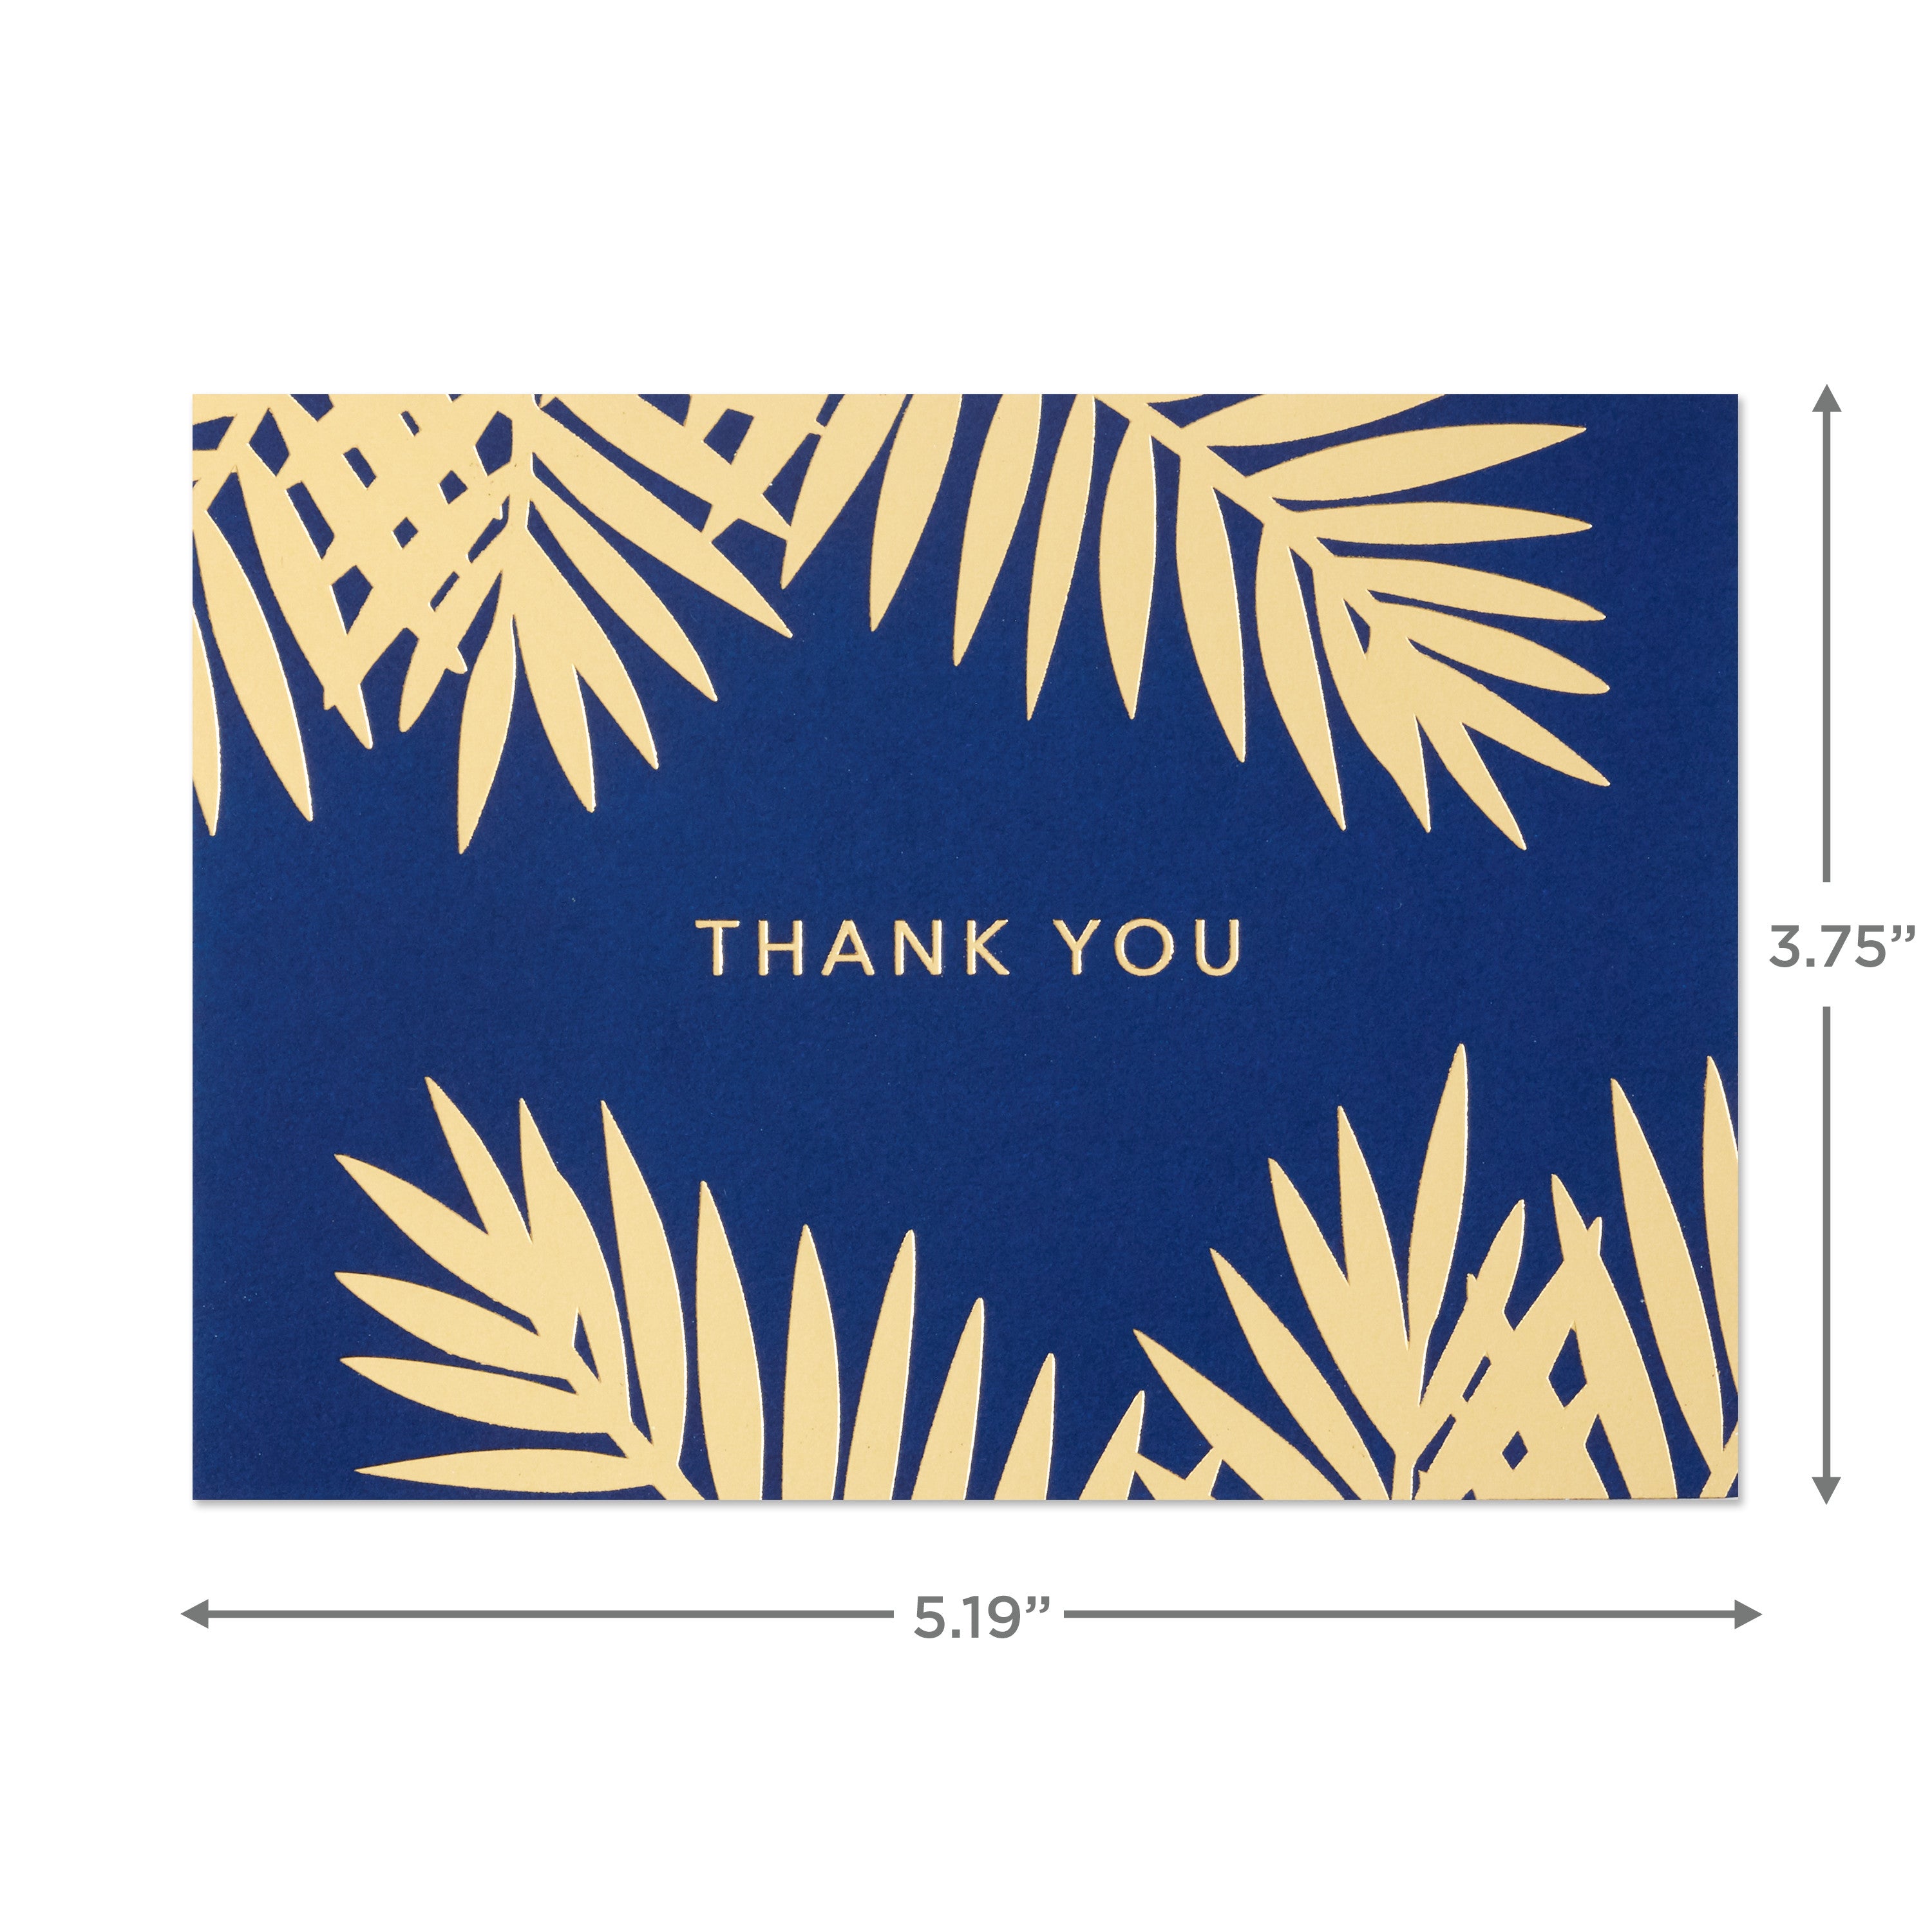 Thank You Cards Assortment, Gold and Navy (120 Thank You Notes with Envelopes for Wedding, Bridal Shower, Baby Shower, Business, Graduation)